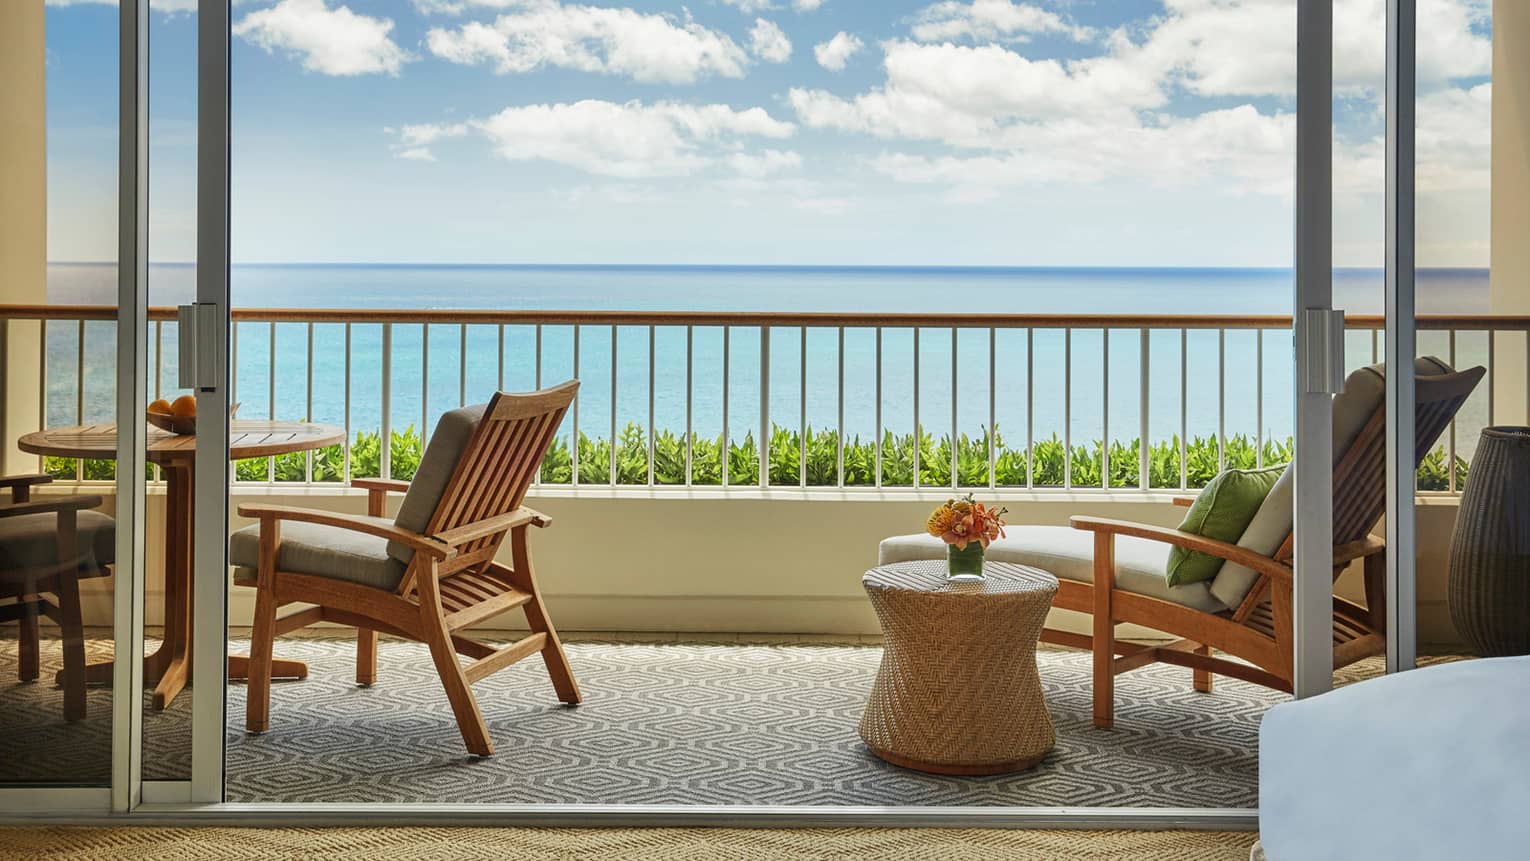 Junior Suite balcony with wood and wicker lounge furniture, ocean views 